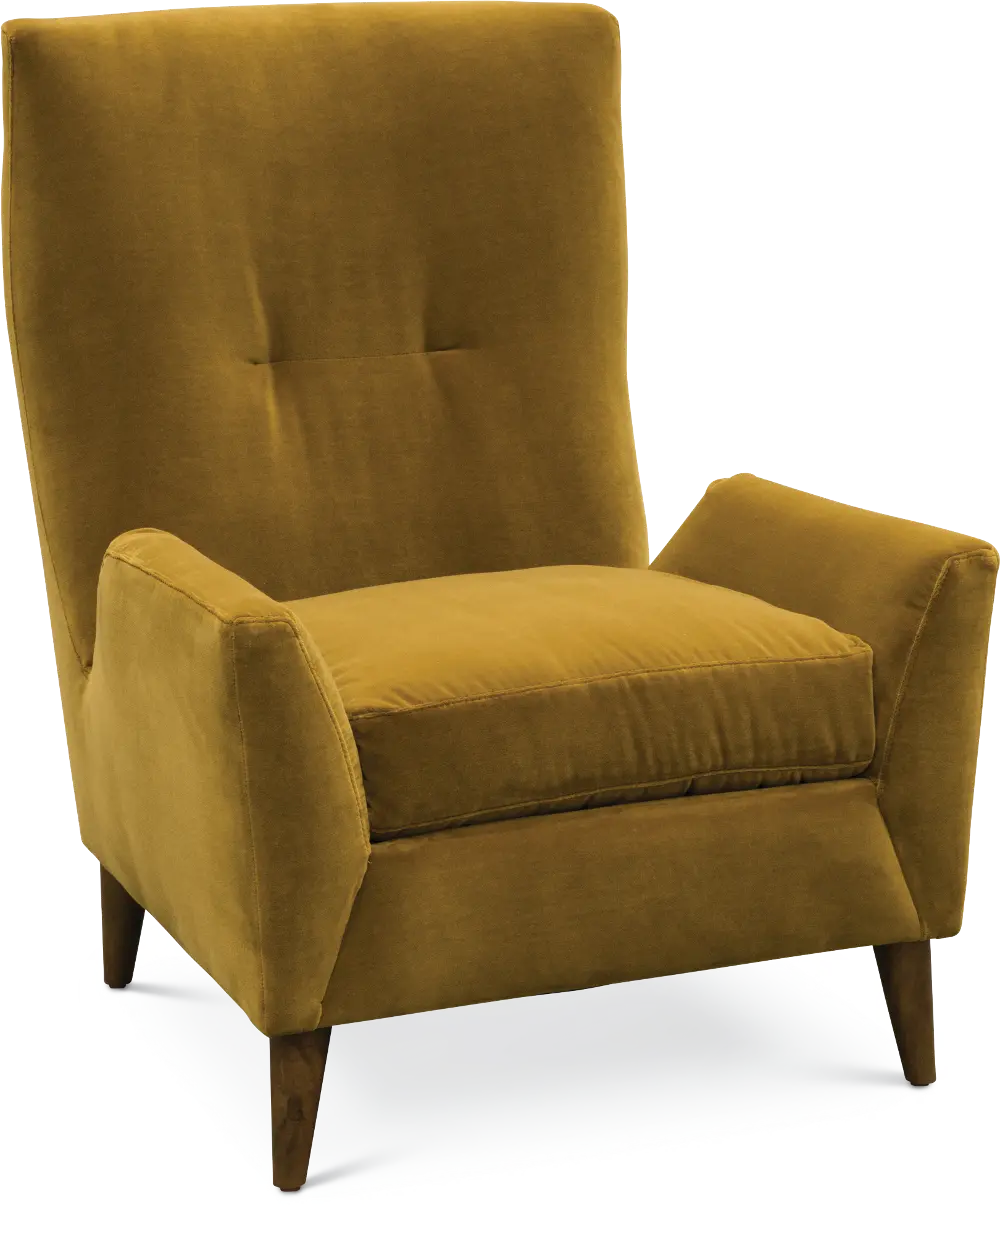 031-68 Mid Century Modern Marzipan Yellow Wing Chair - Kelsey-1